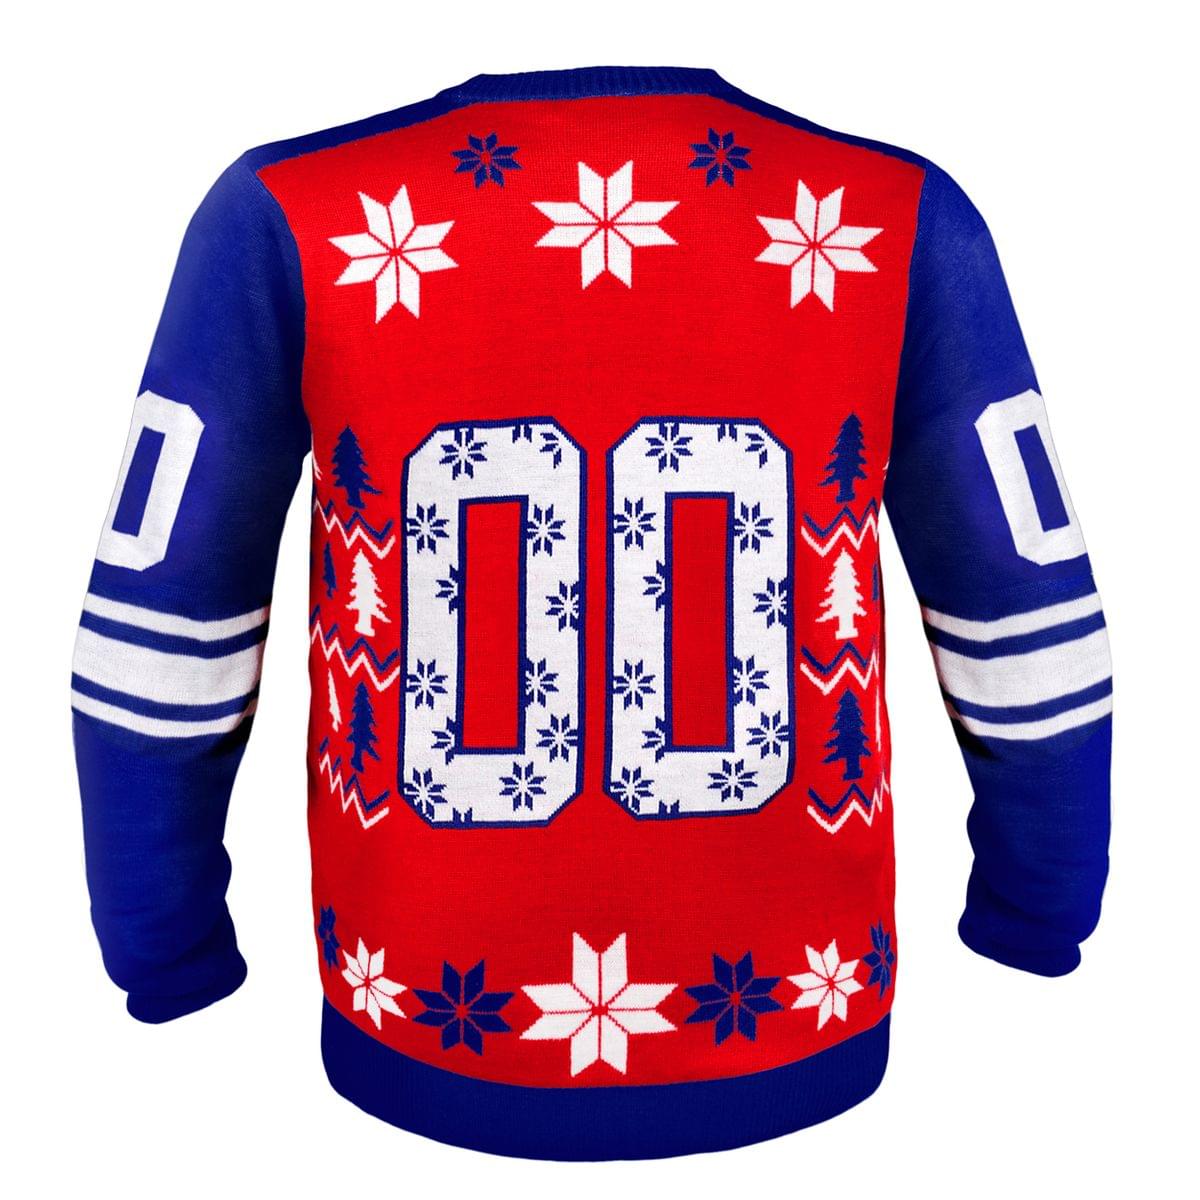 New York Rangers Ugly Christmas Sweater Adult S New w/o tags